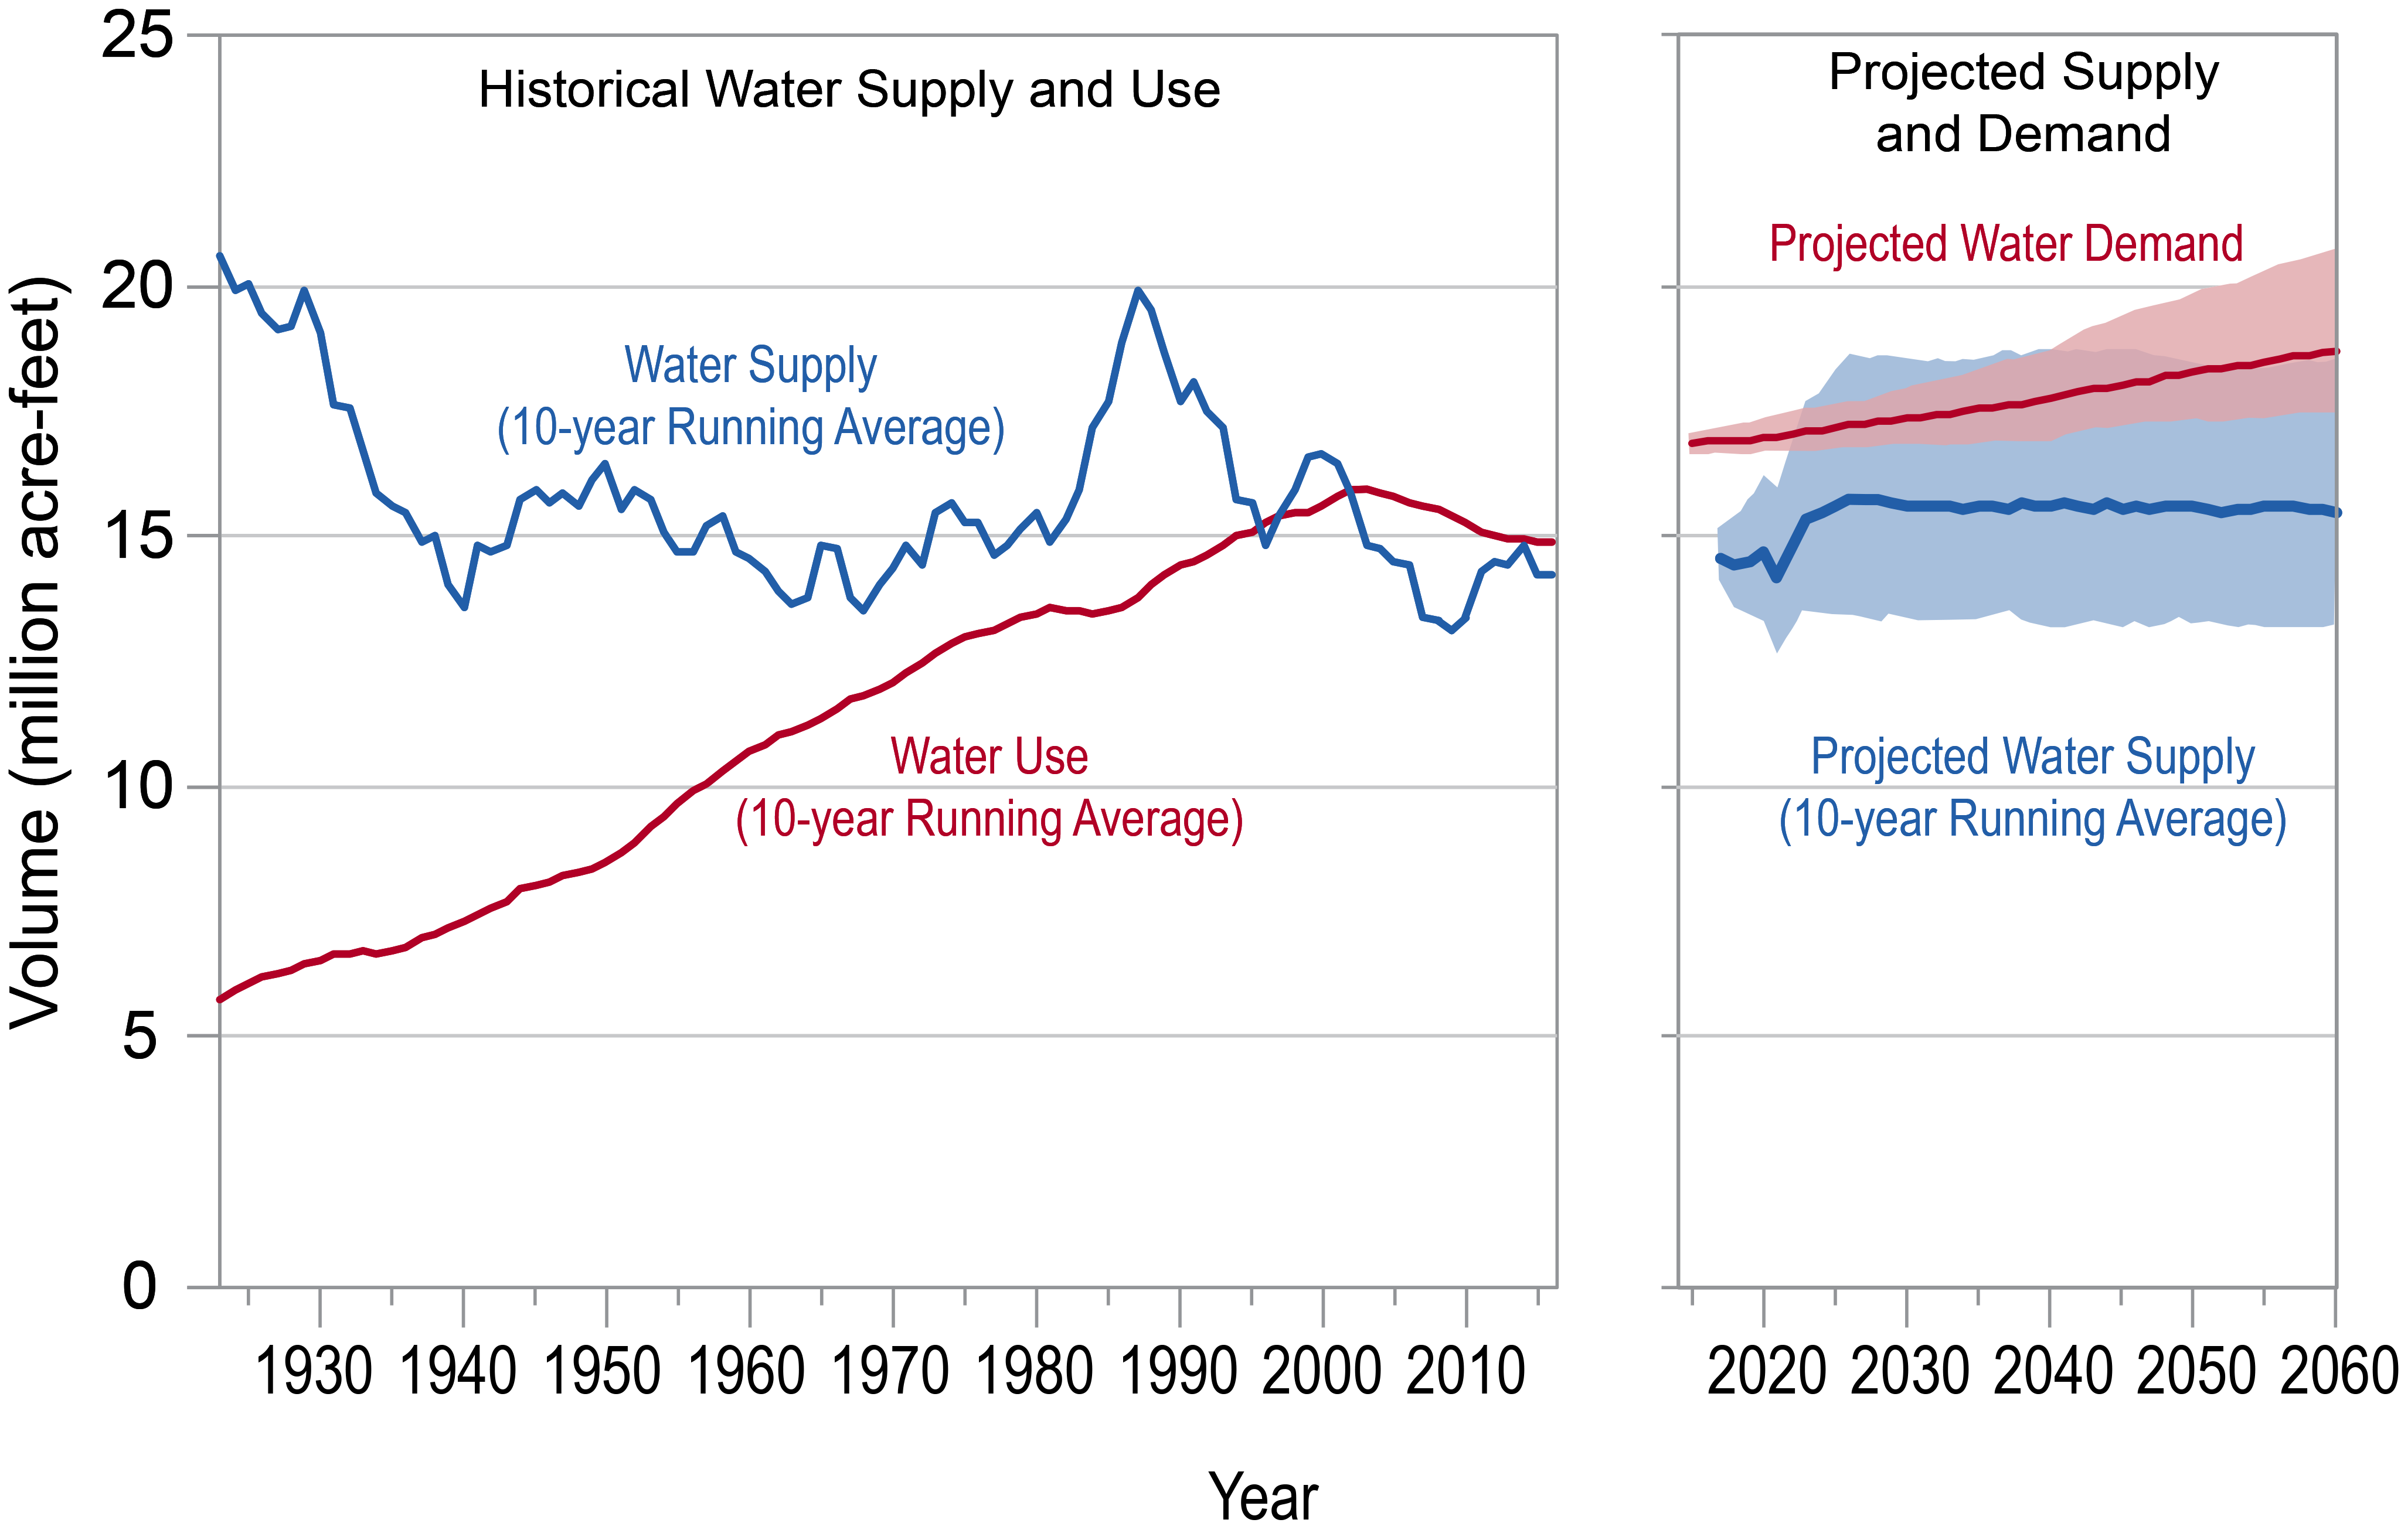 Two part graph showing (1) historical water supply (in blue) and use (in red)(1930 – 2015) next to (2) Projected Supply and Demand of water (2015 – 2060) in the Colorado River Basin